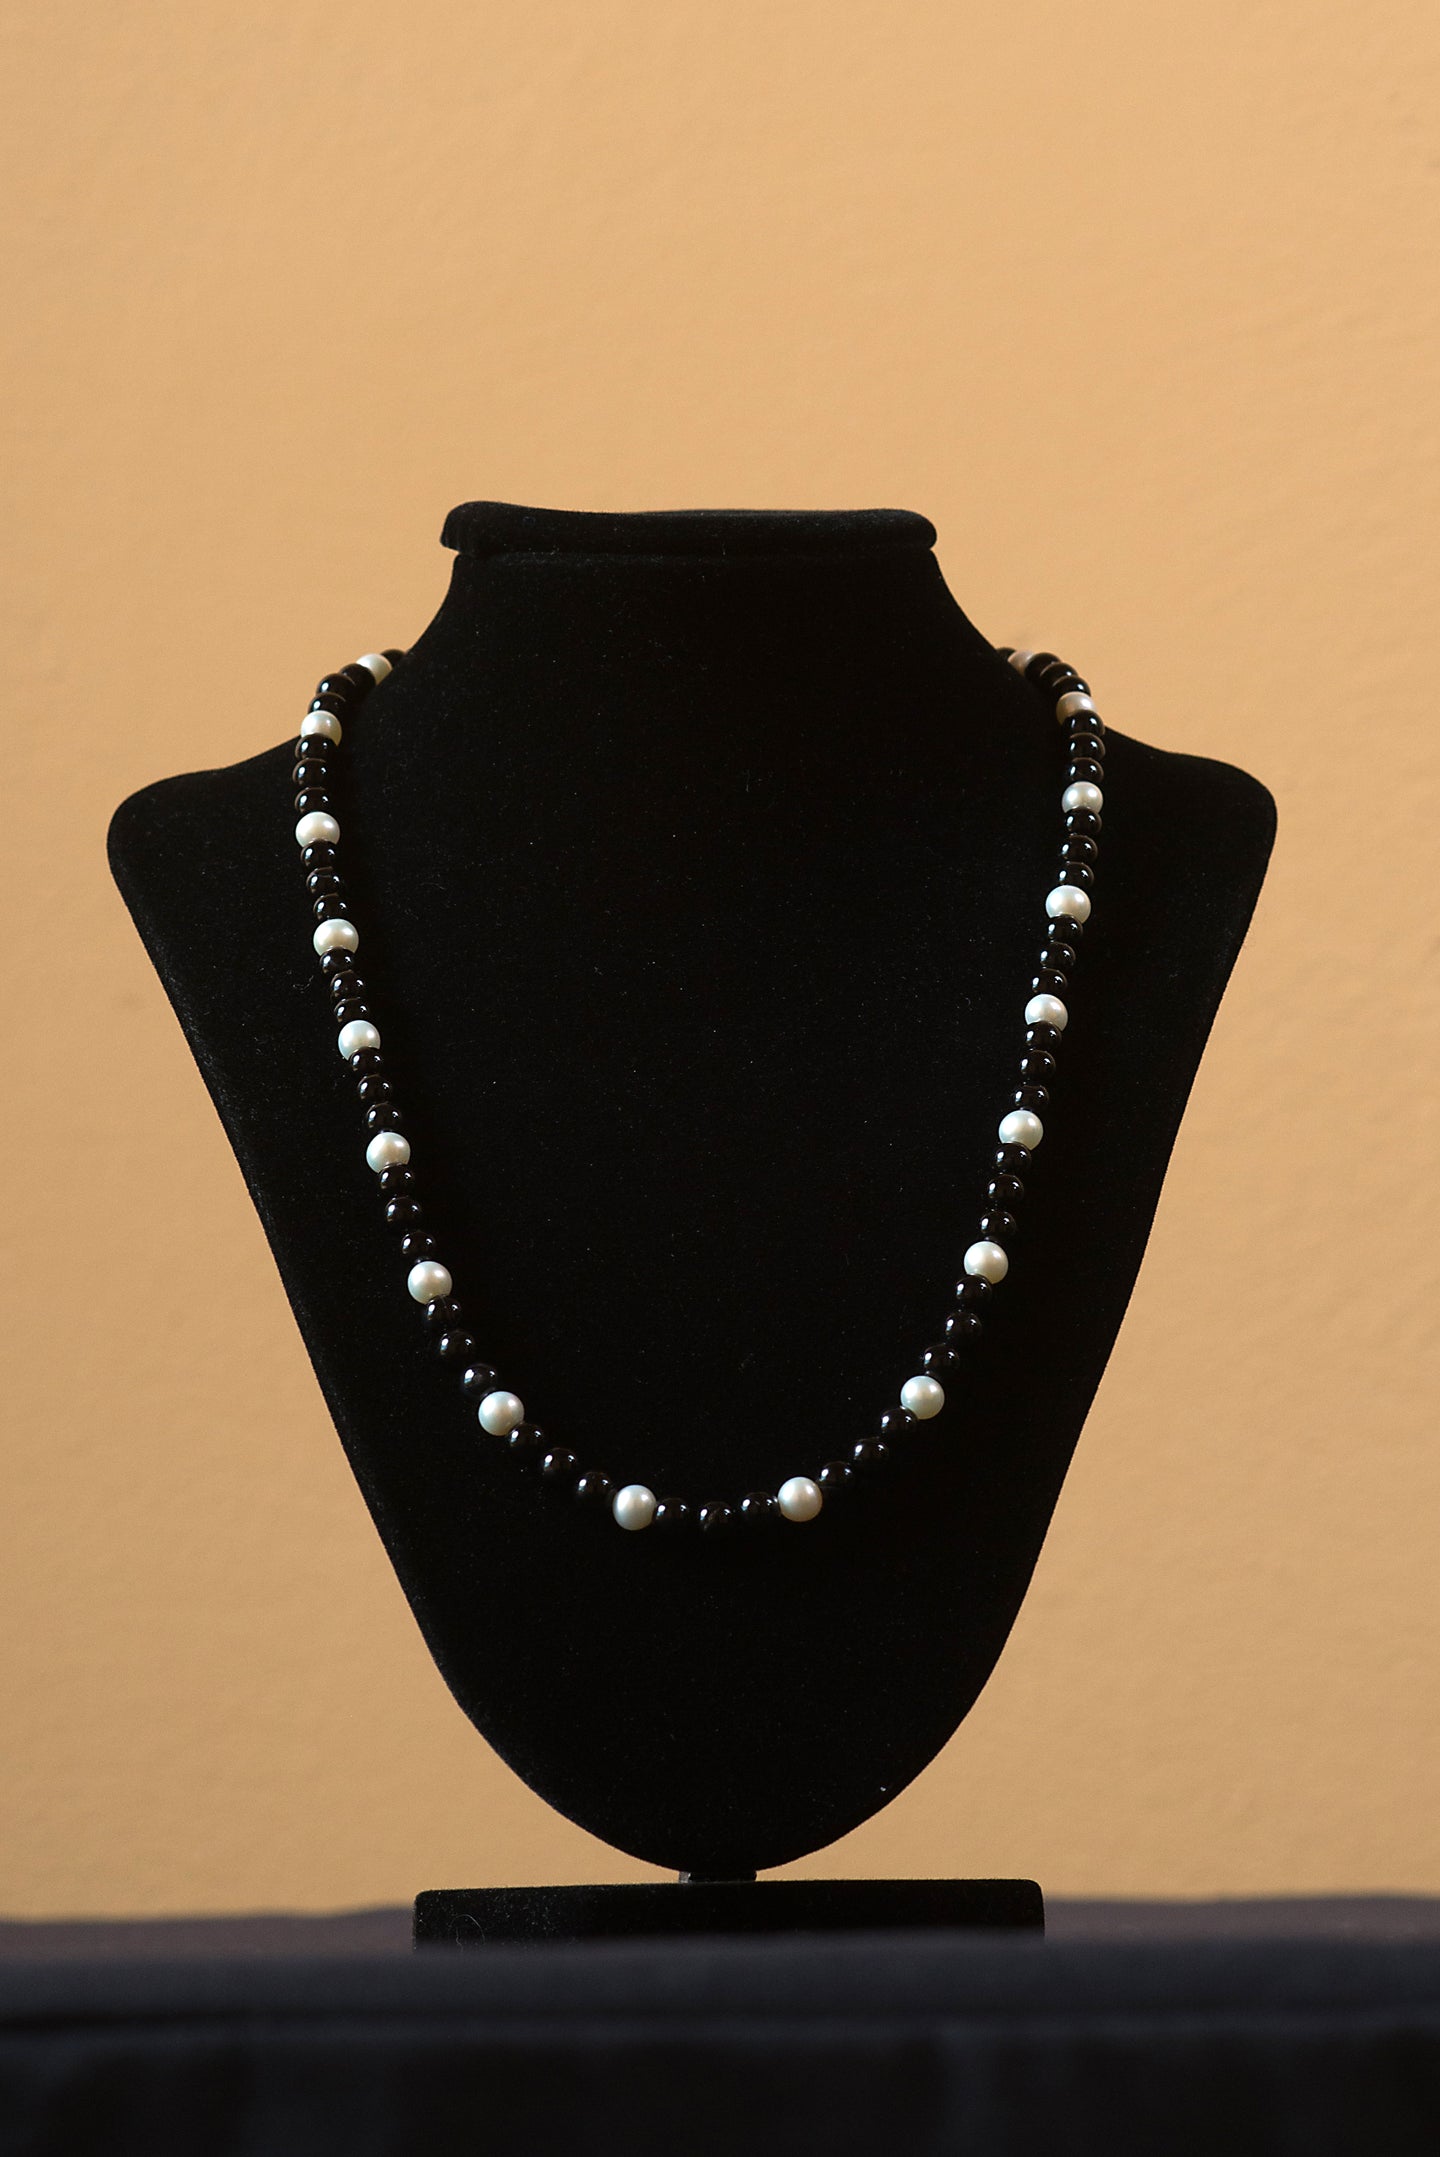 Necklace - Onyx Beads & Freshwater Pearls